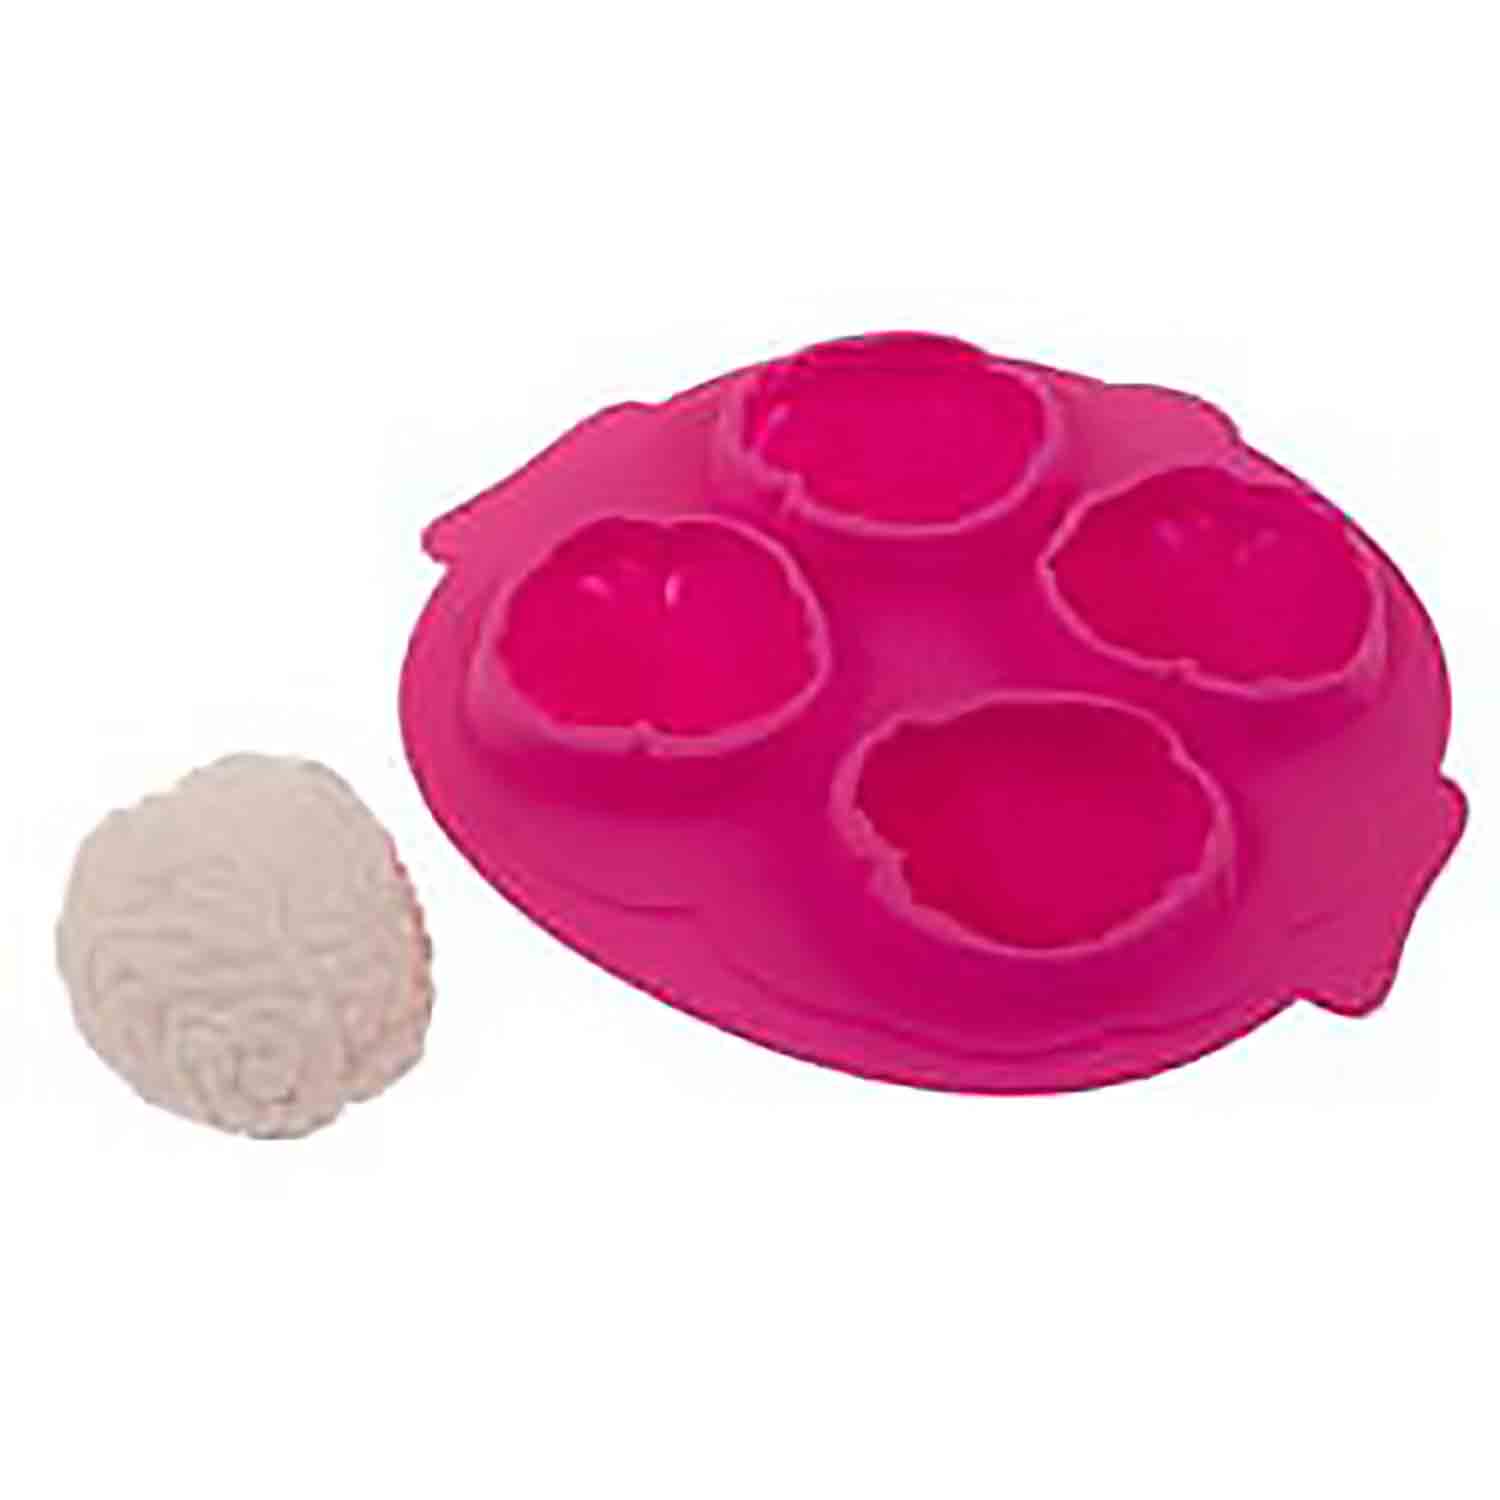 Brain Freeze - Silicone Ice and Candy Mold